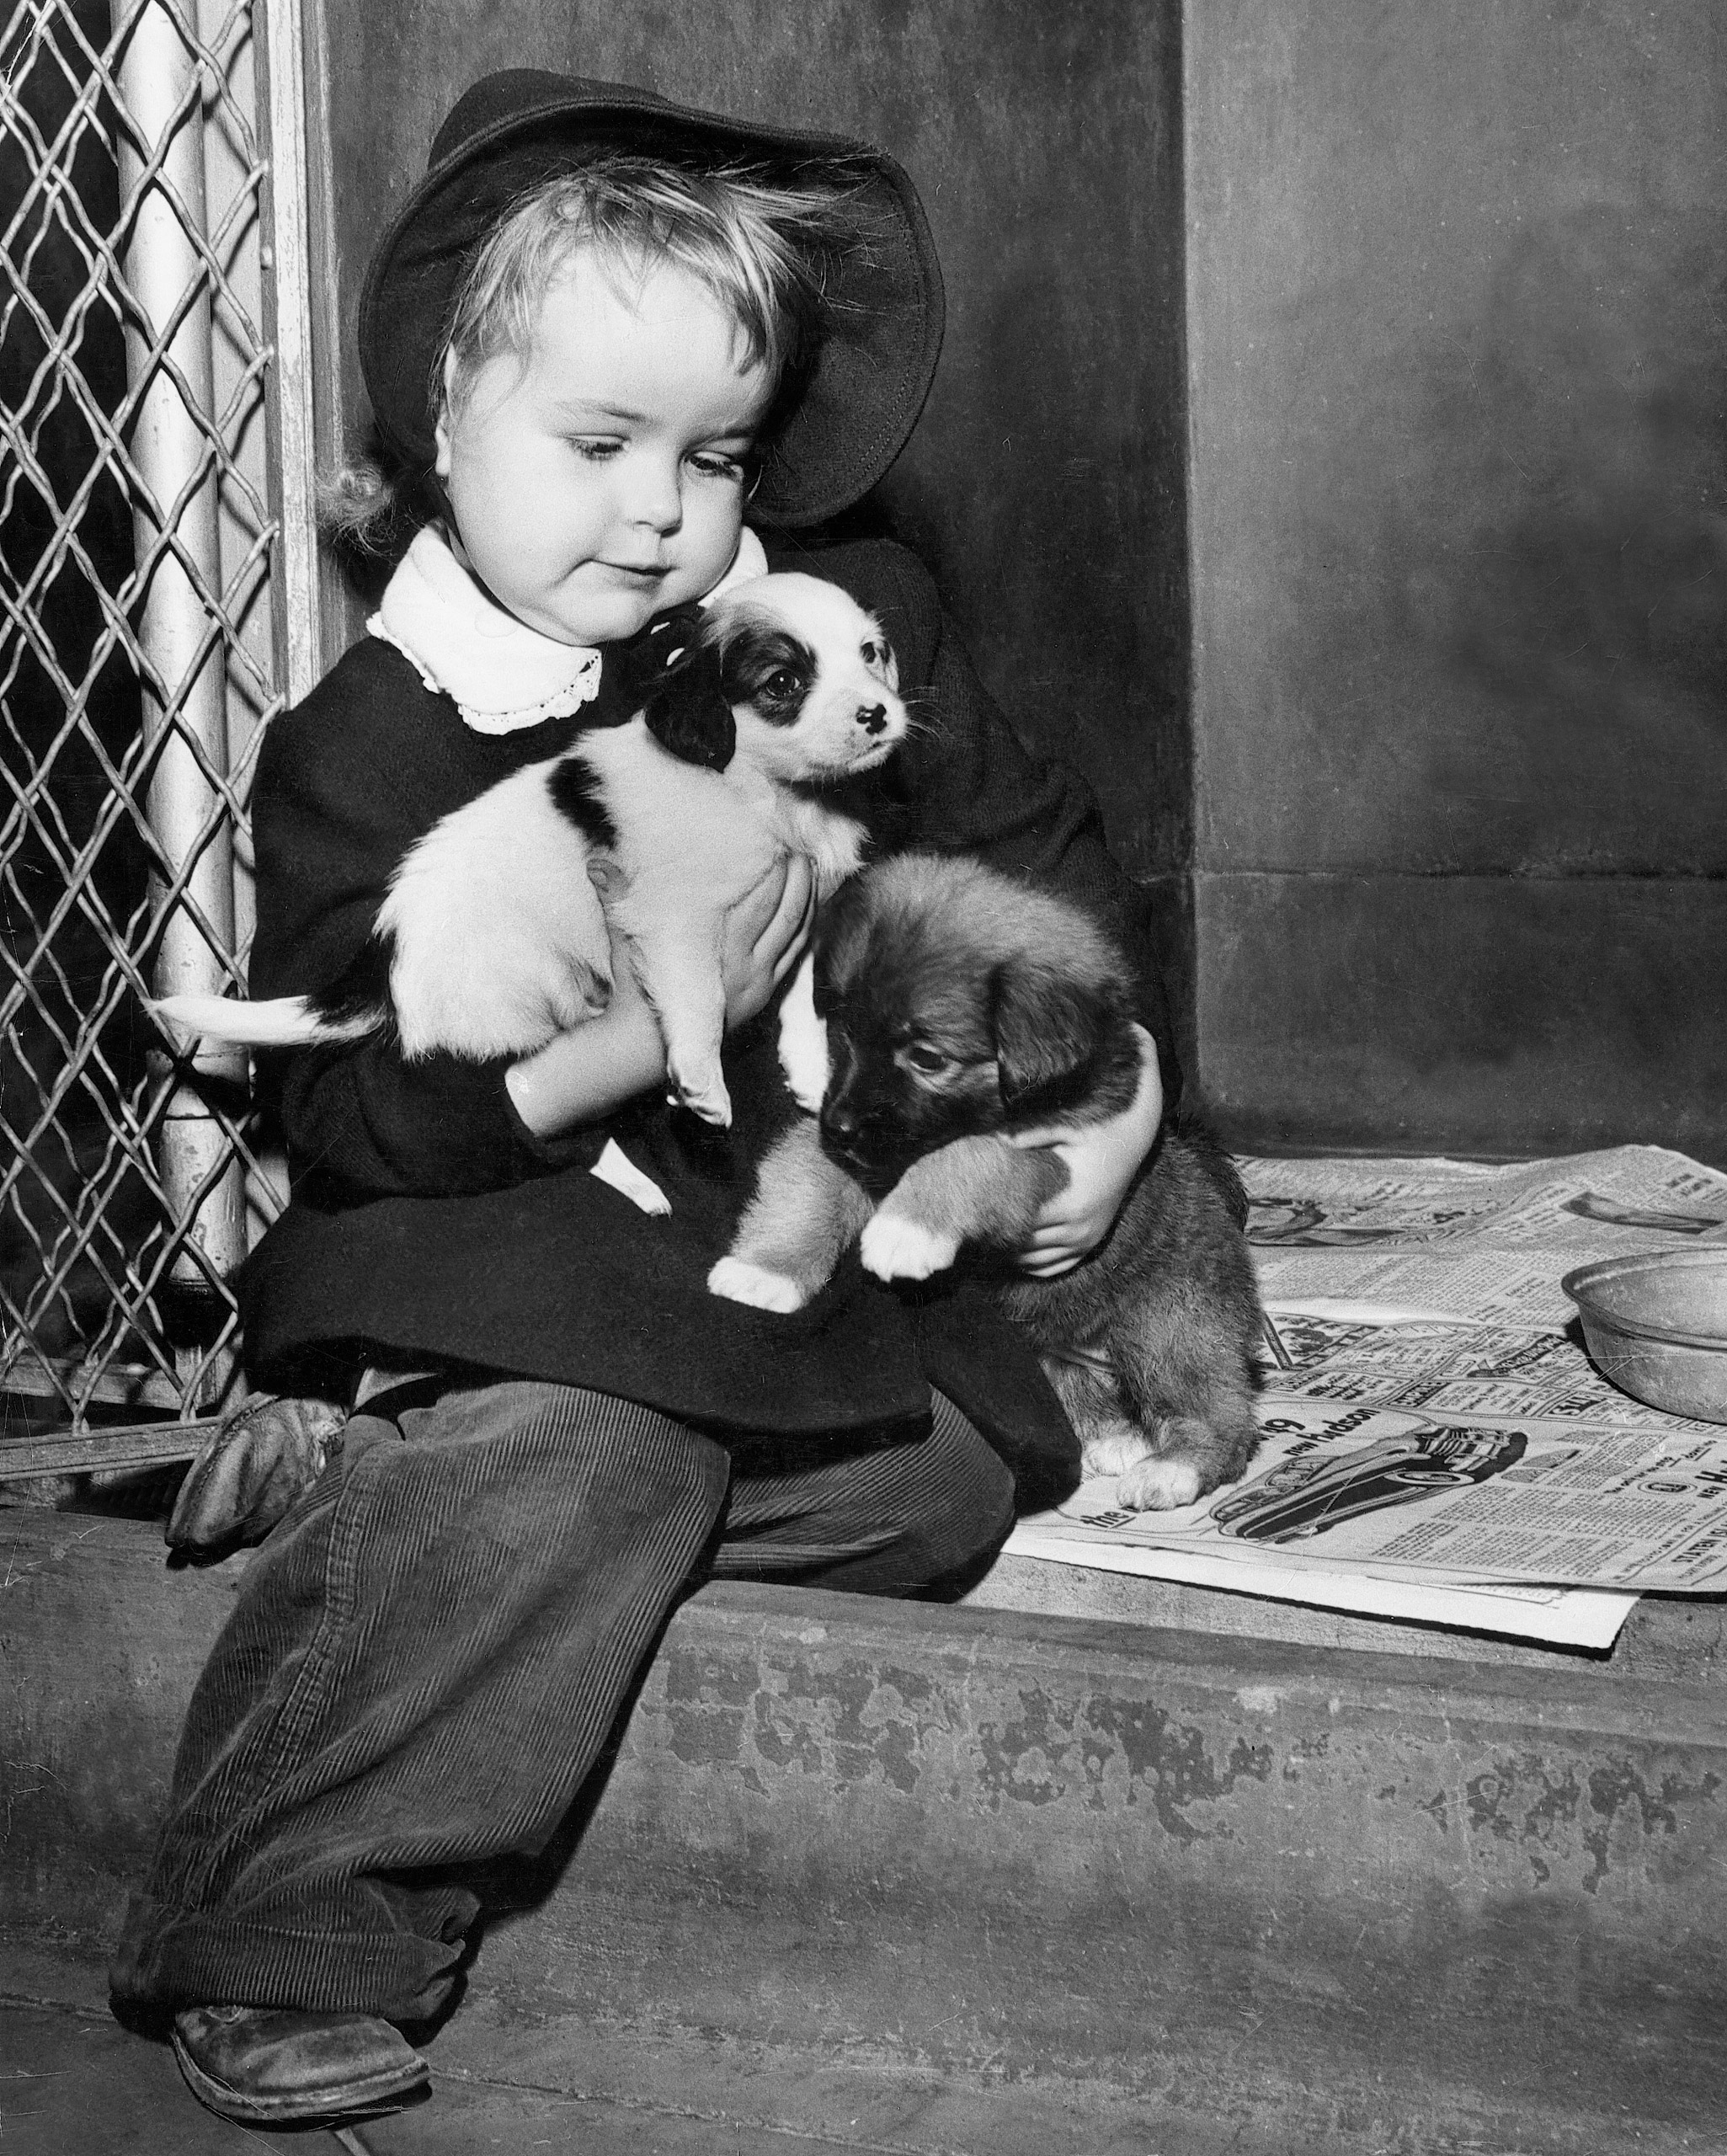 Little girl with ASPCA adoptable puppies, 1948.